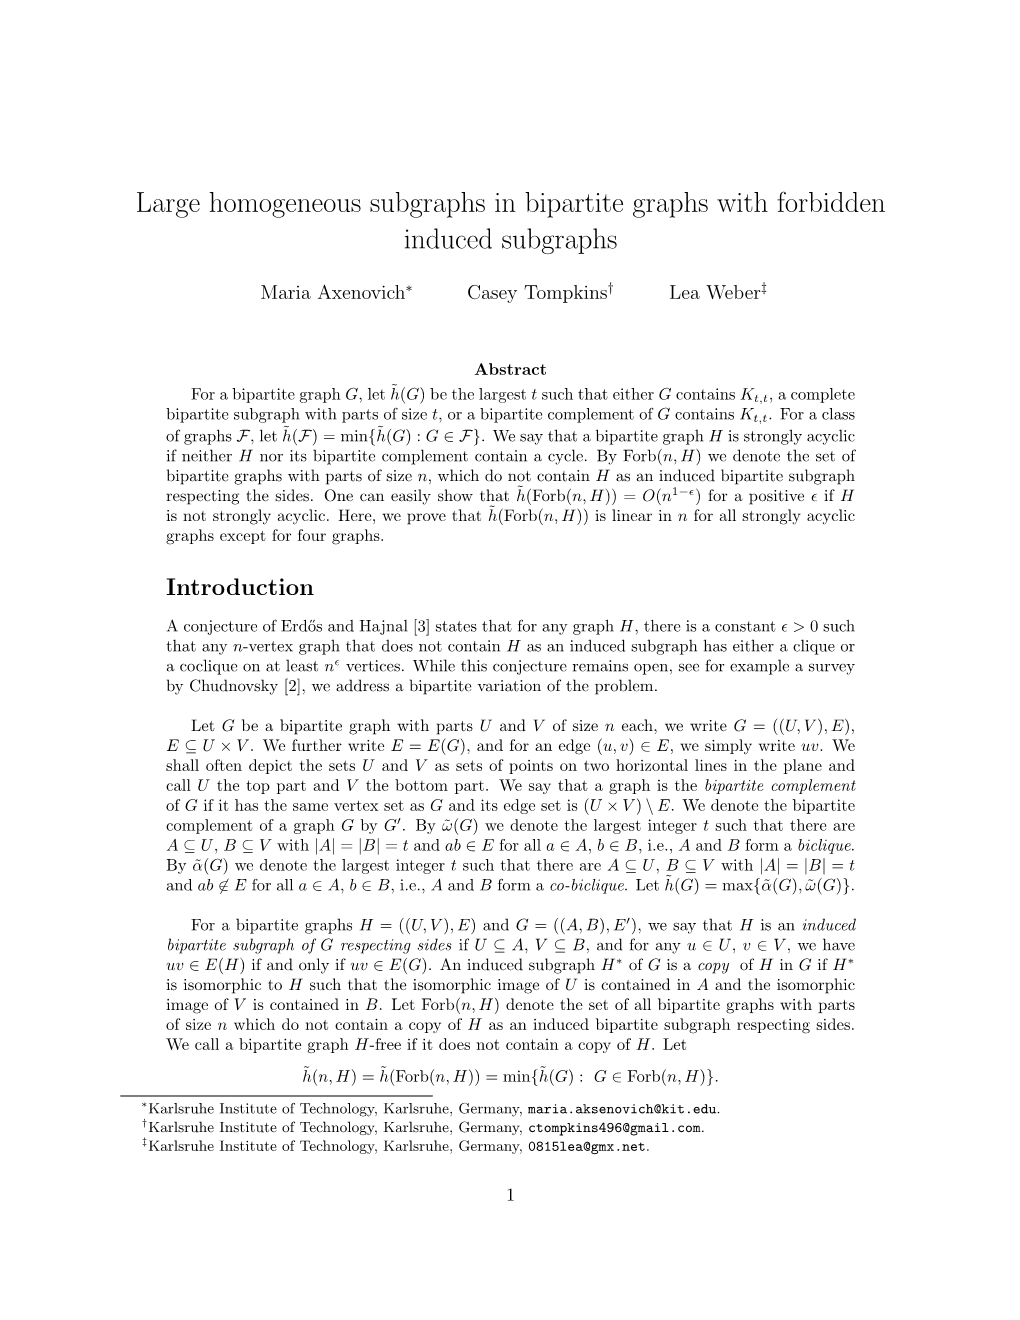 Large Homogeneous Subgraphs in Bipartite Graphs with Forbidden Induced Subgraphs